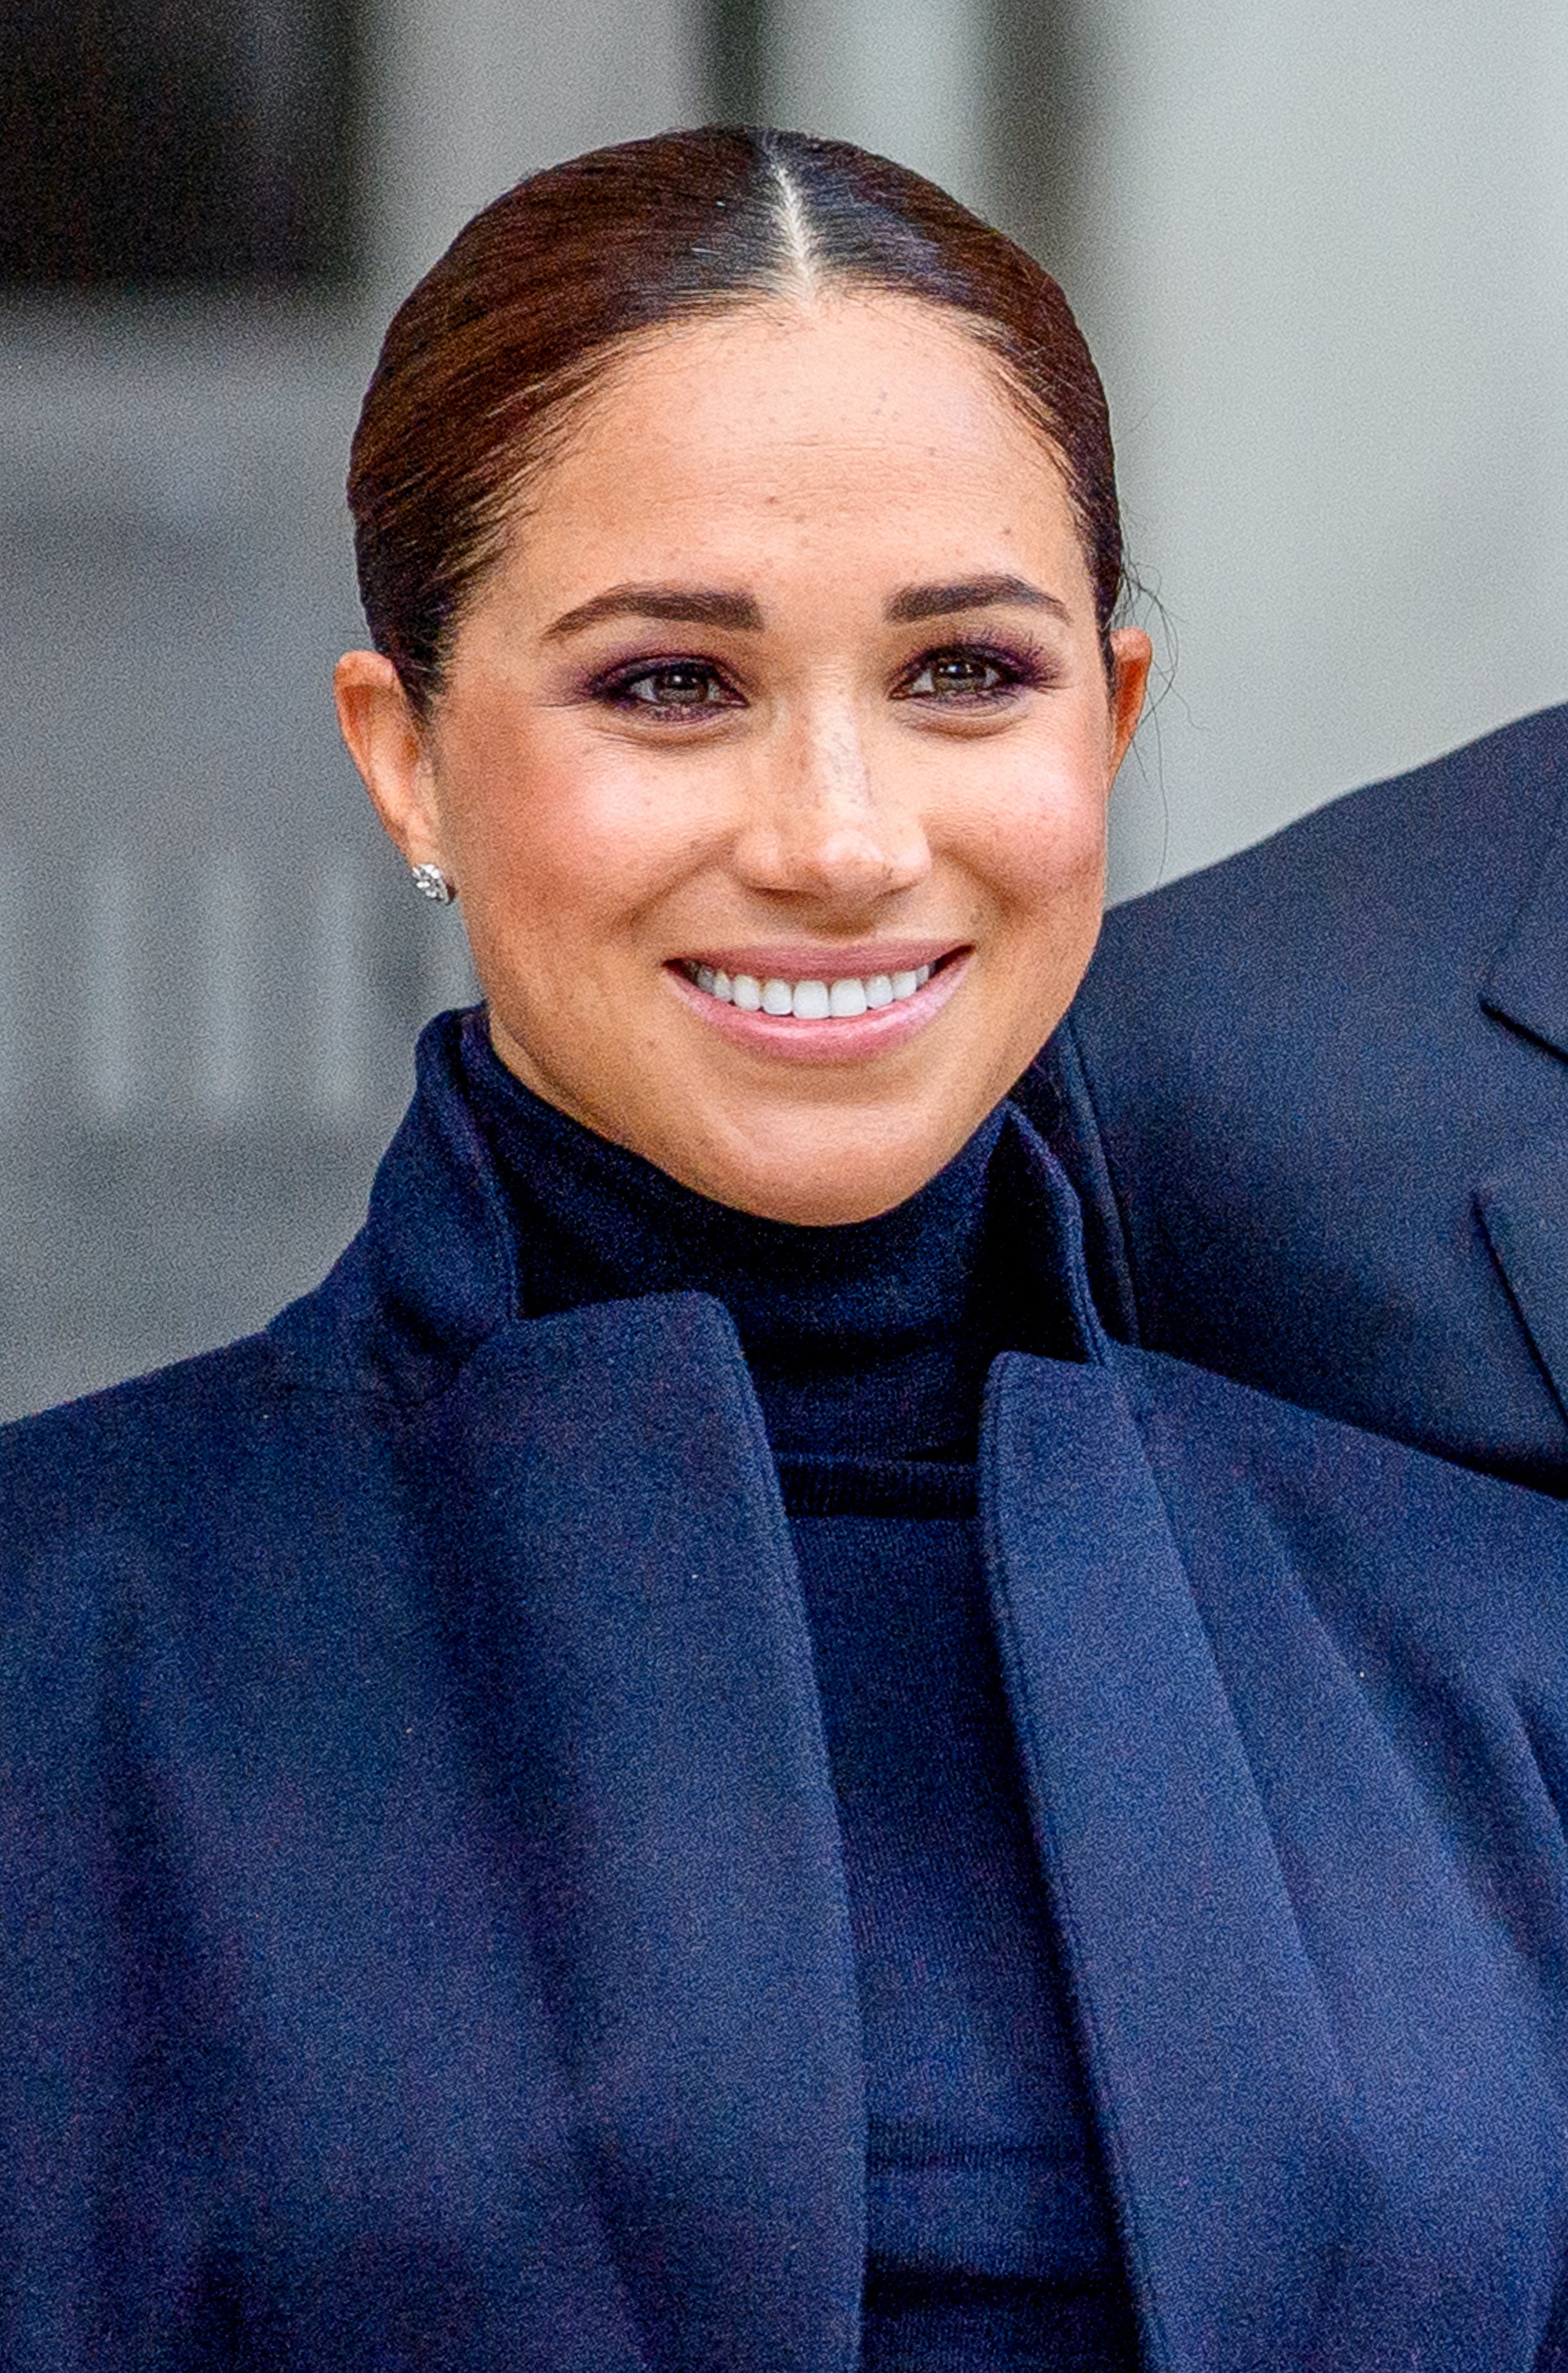 Meghan Markle at the World Trade Center